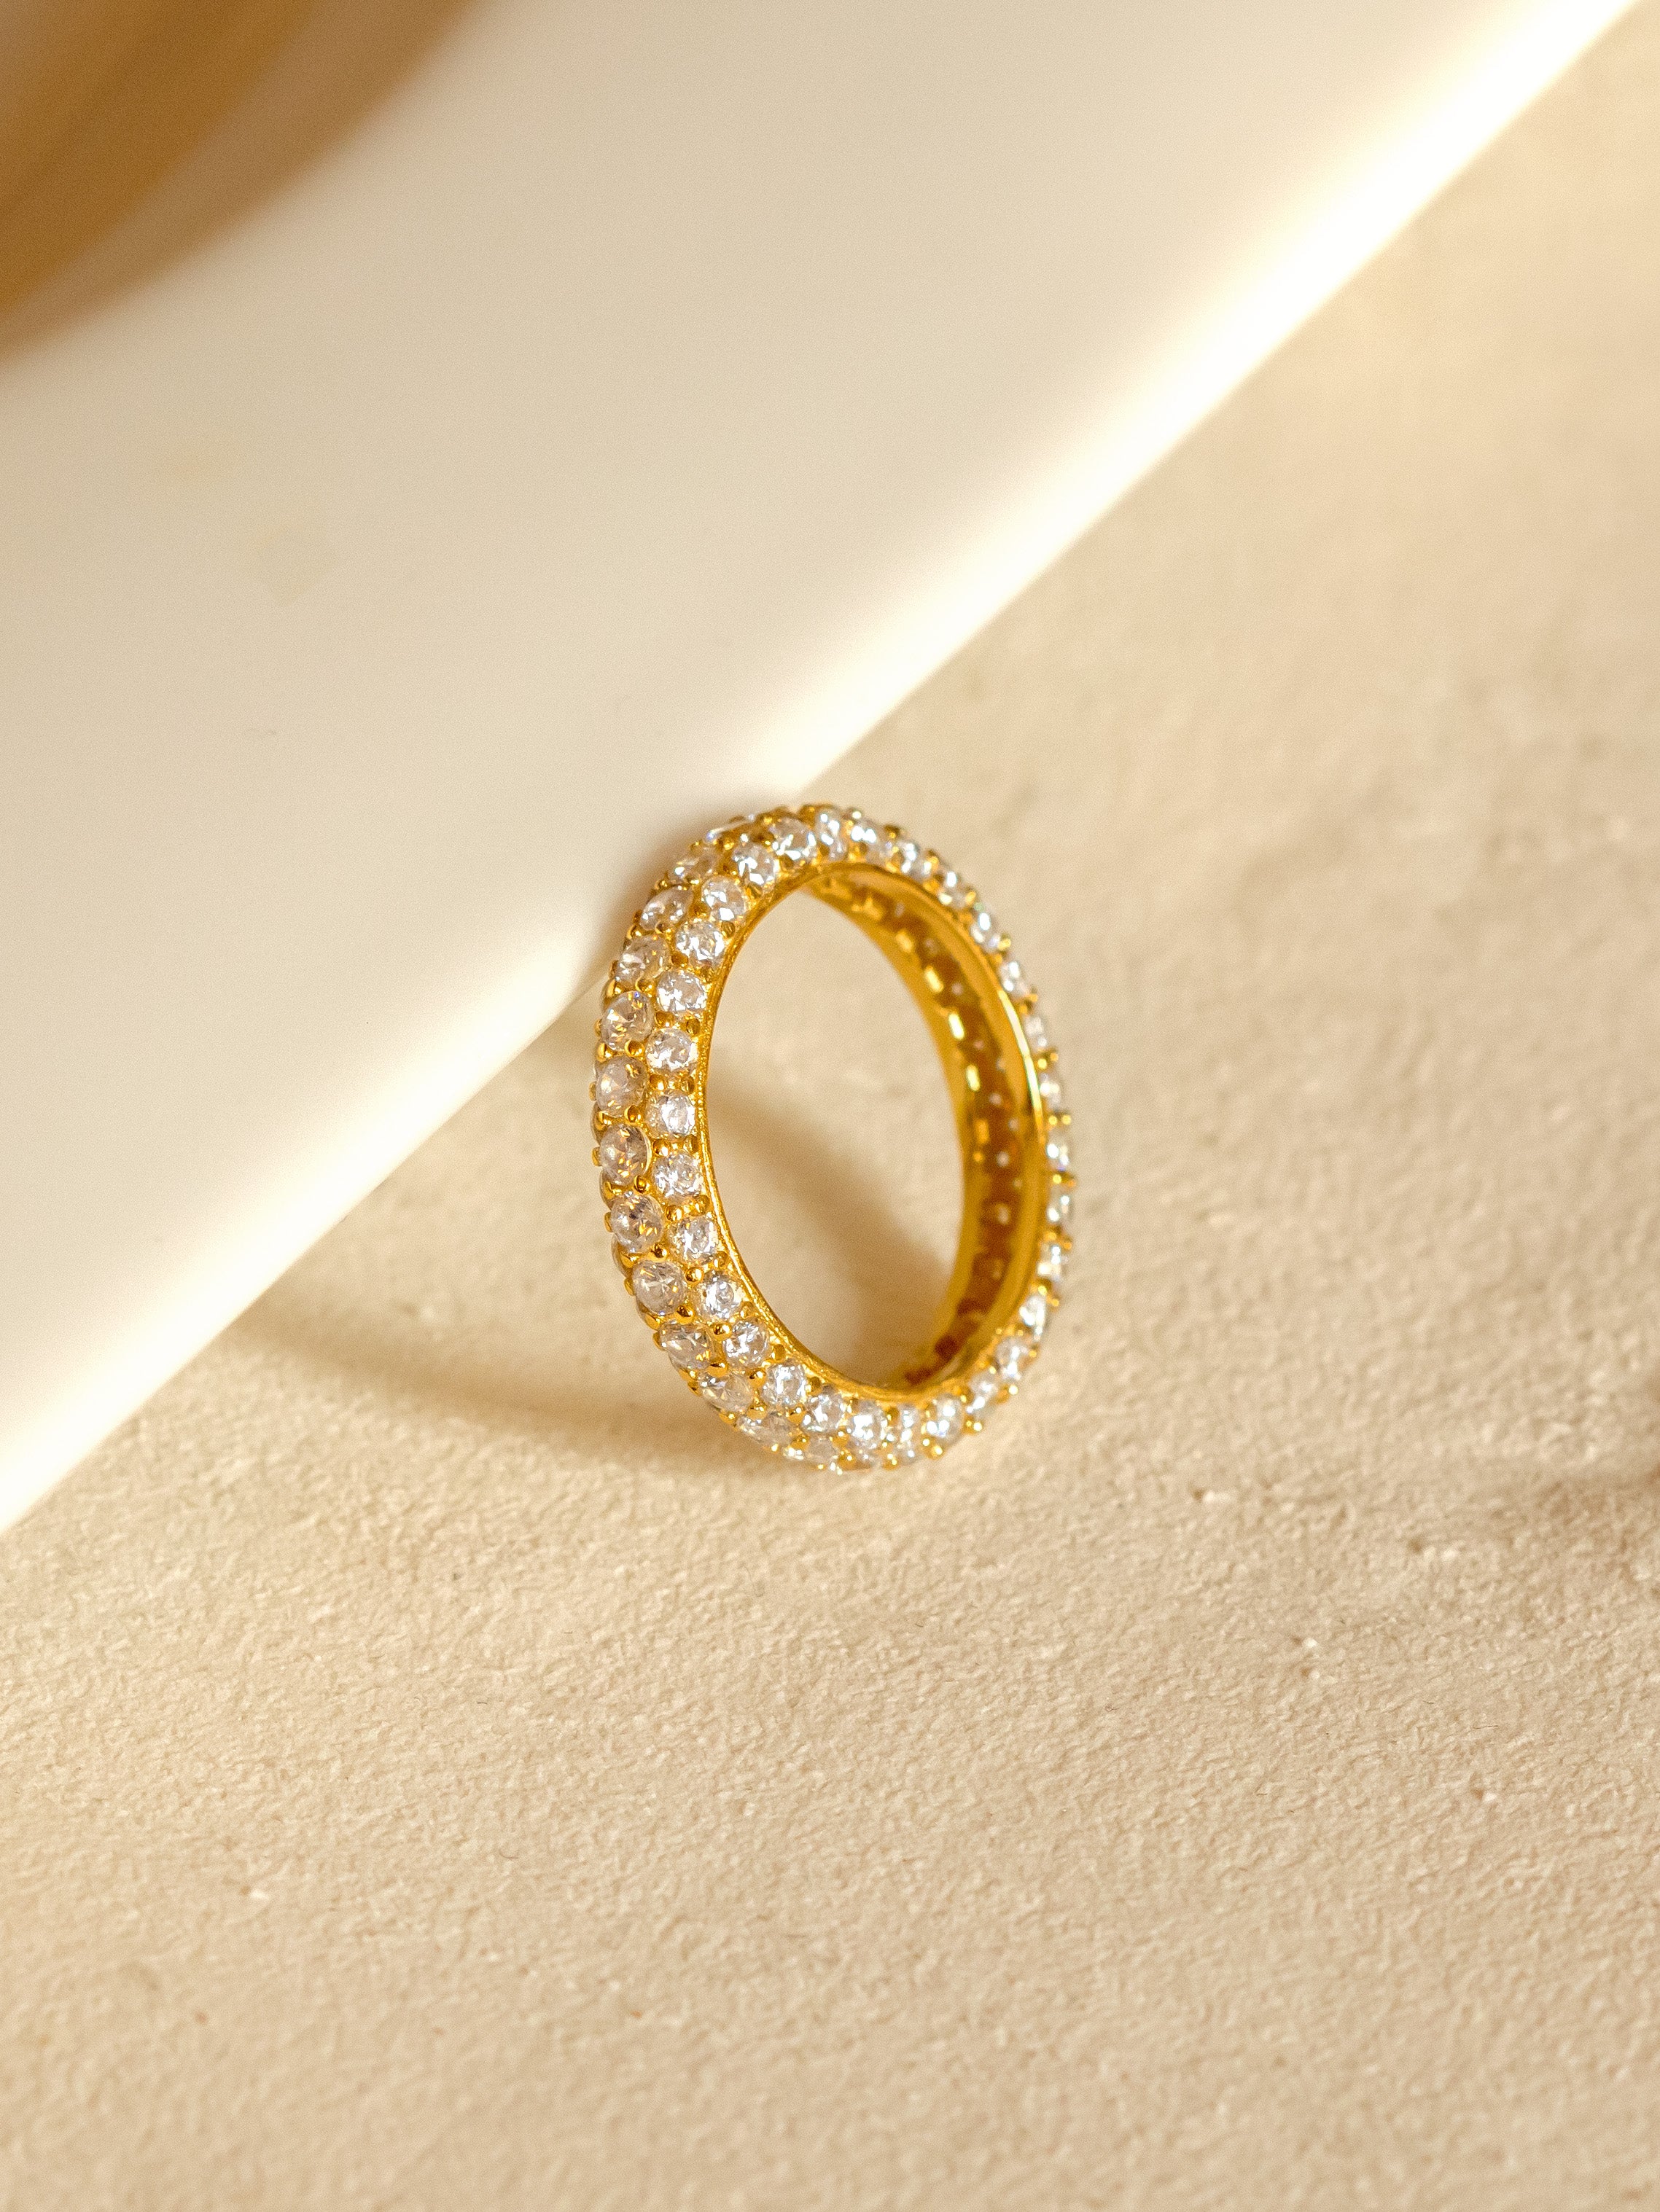 Gold Pave Dome Ring With Sparkling Stones